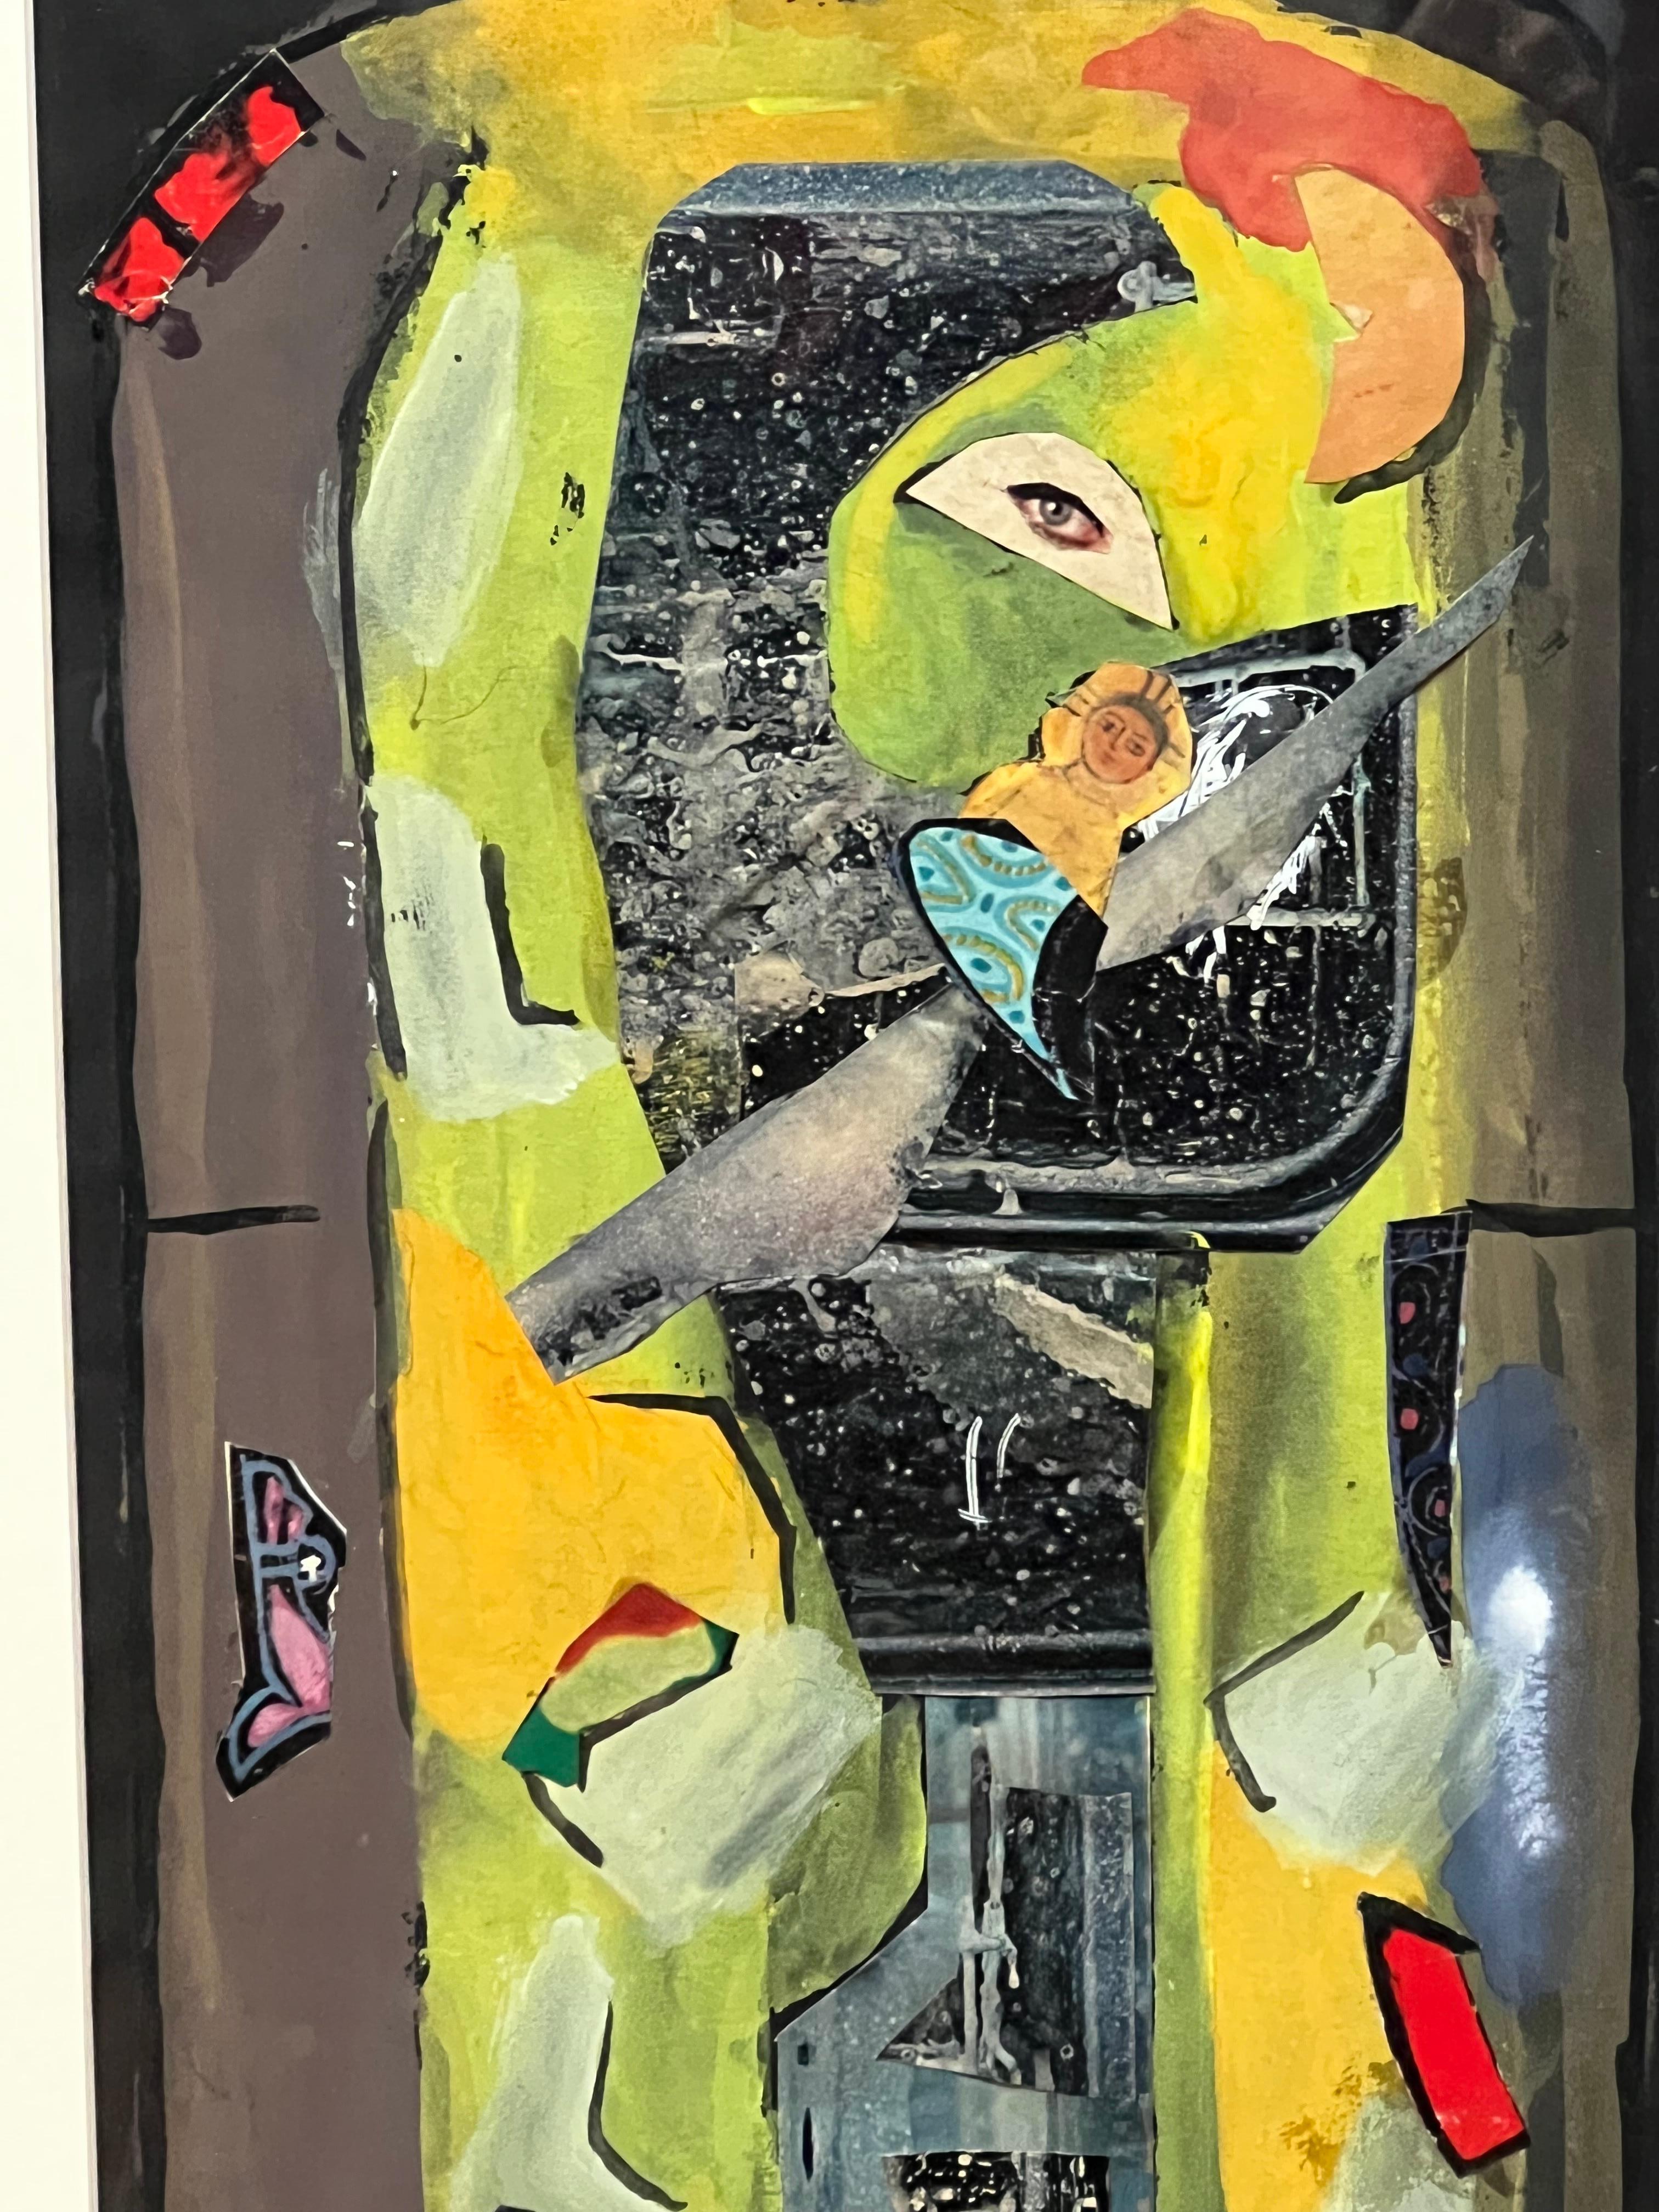 This is a semi-abstract watercolor mixed-media piece by MF Camilleri, dated 1964. Against a dark, grey background reminiscent of outer space from within a space shuttle, a long blend of green and yellow watercolor hues encircles the rim of the